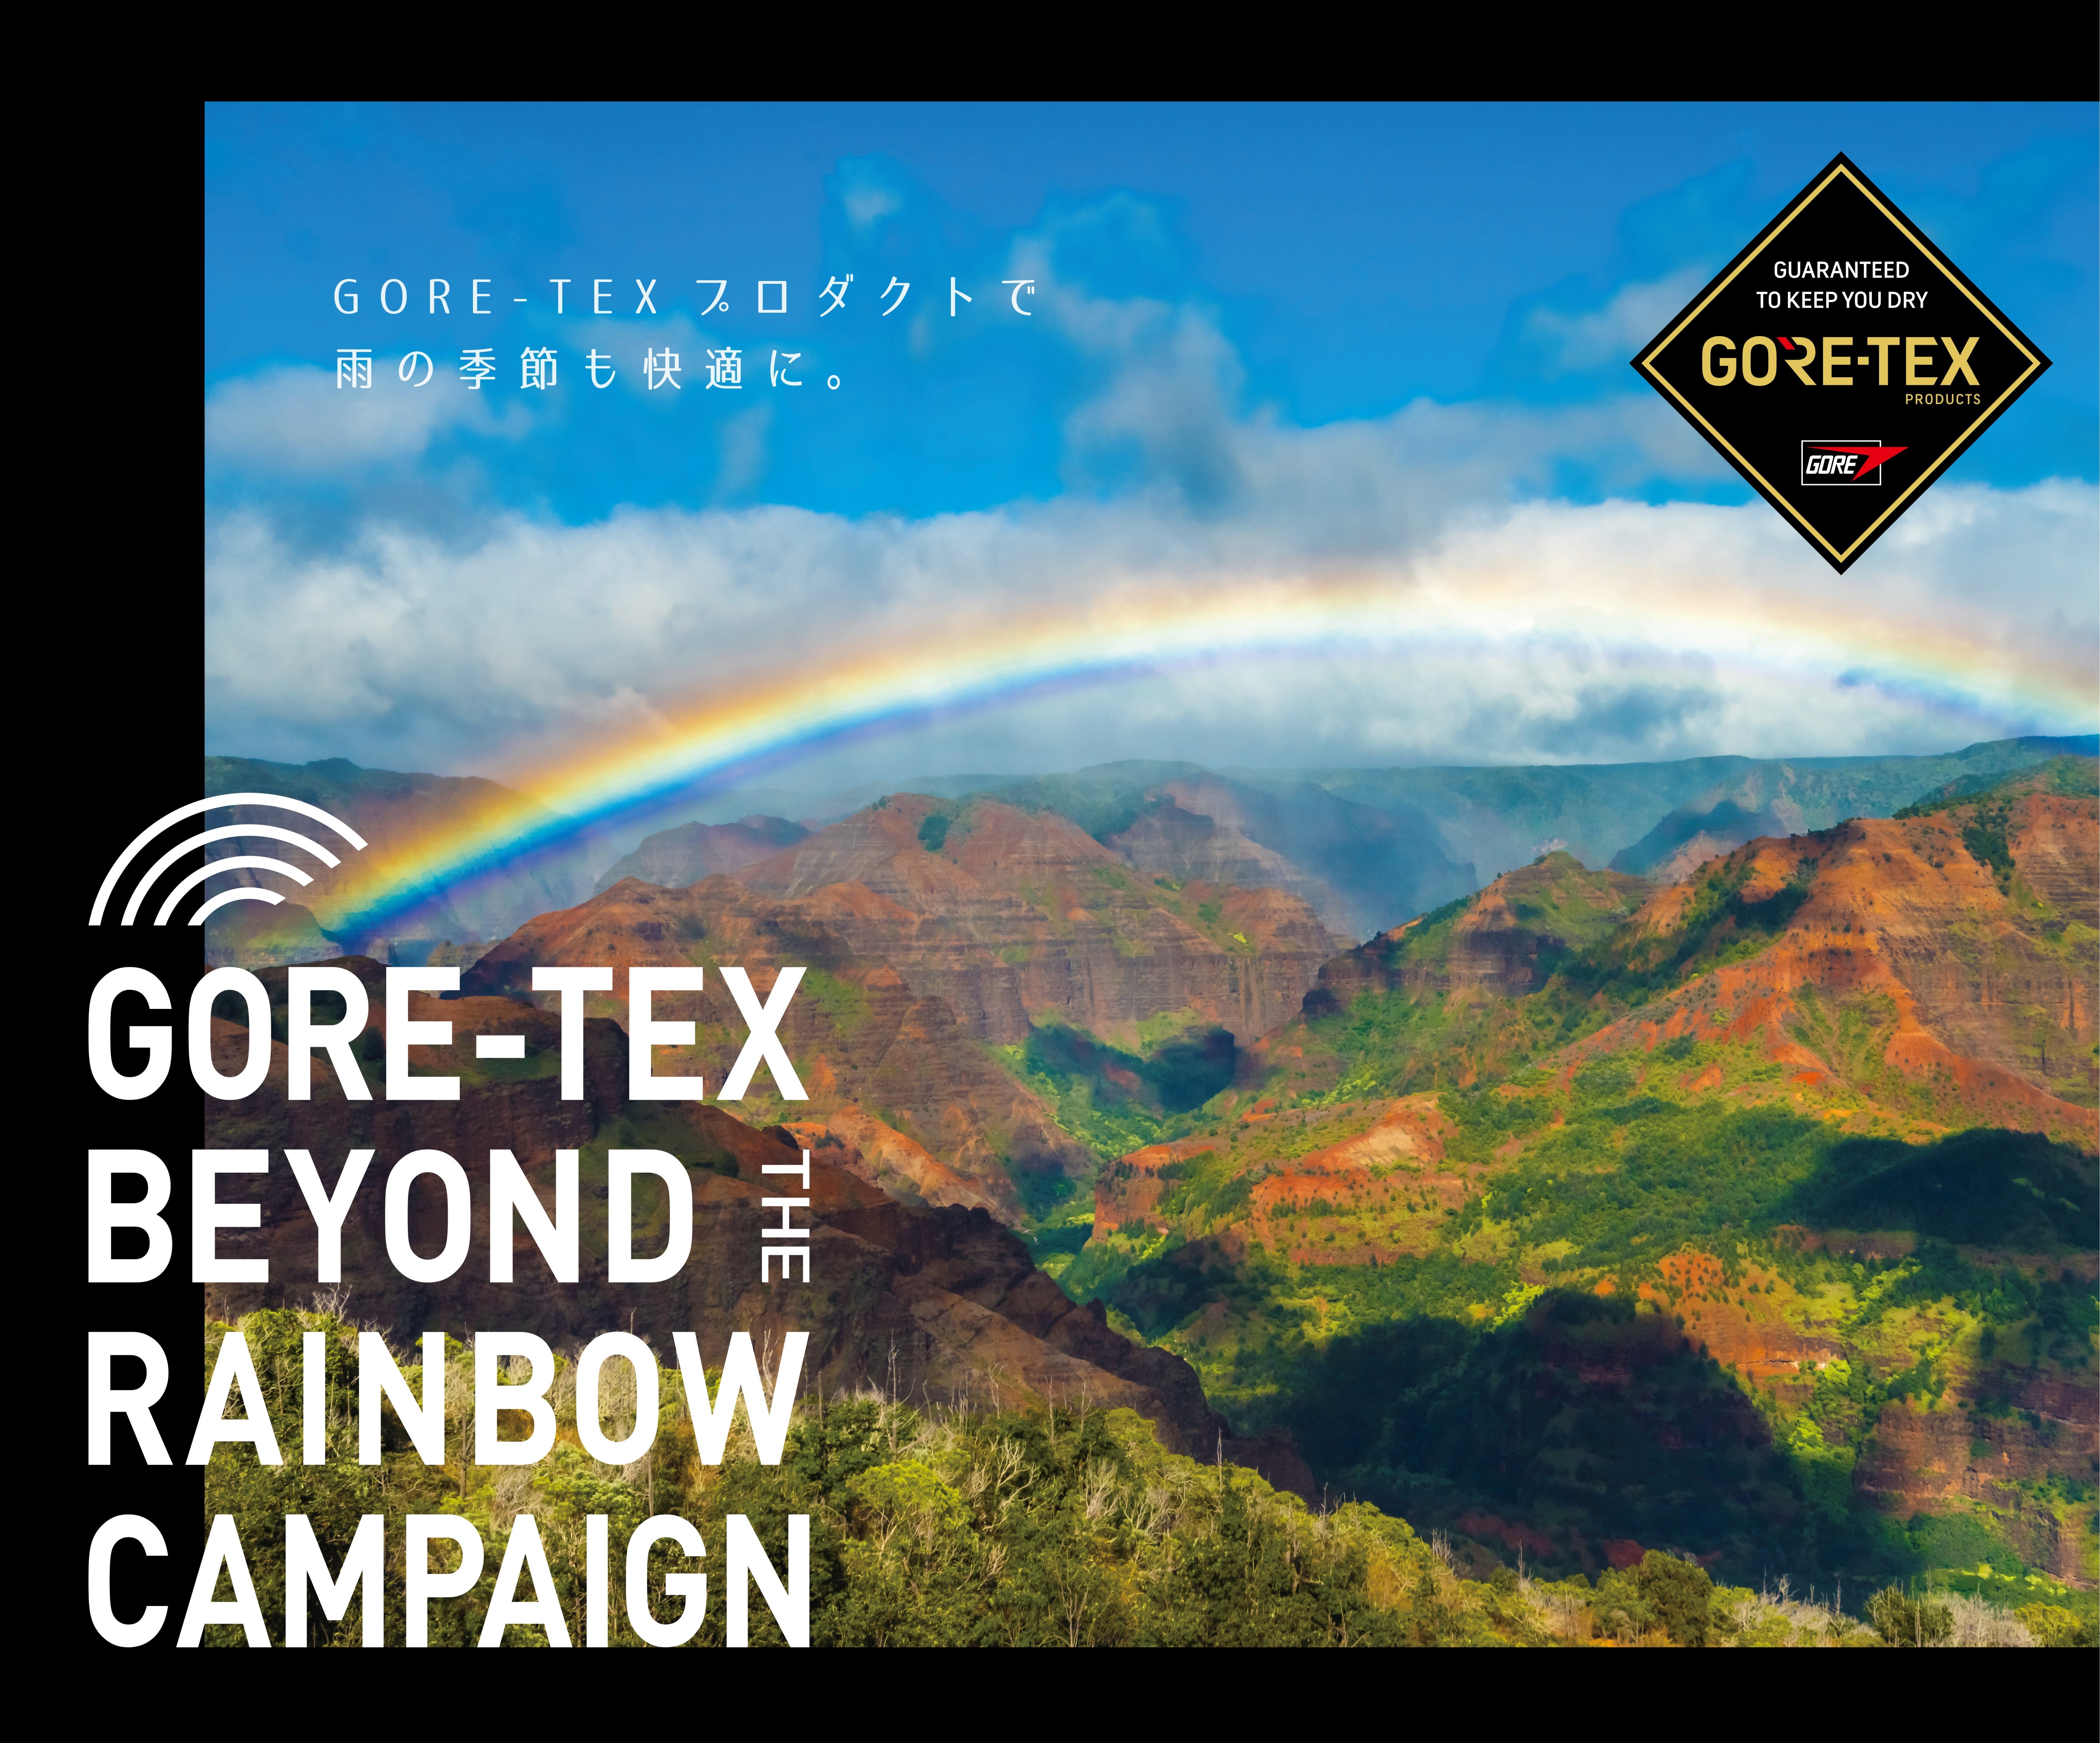 Beyond the rainbow campaign